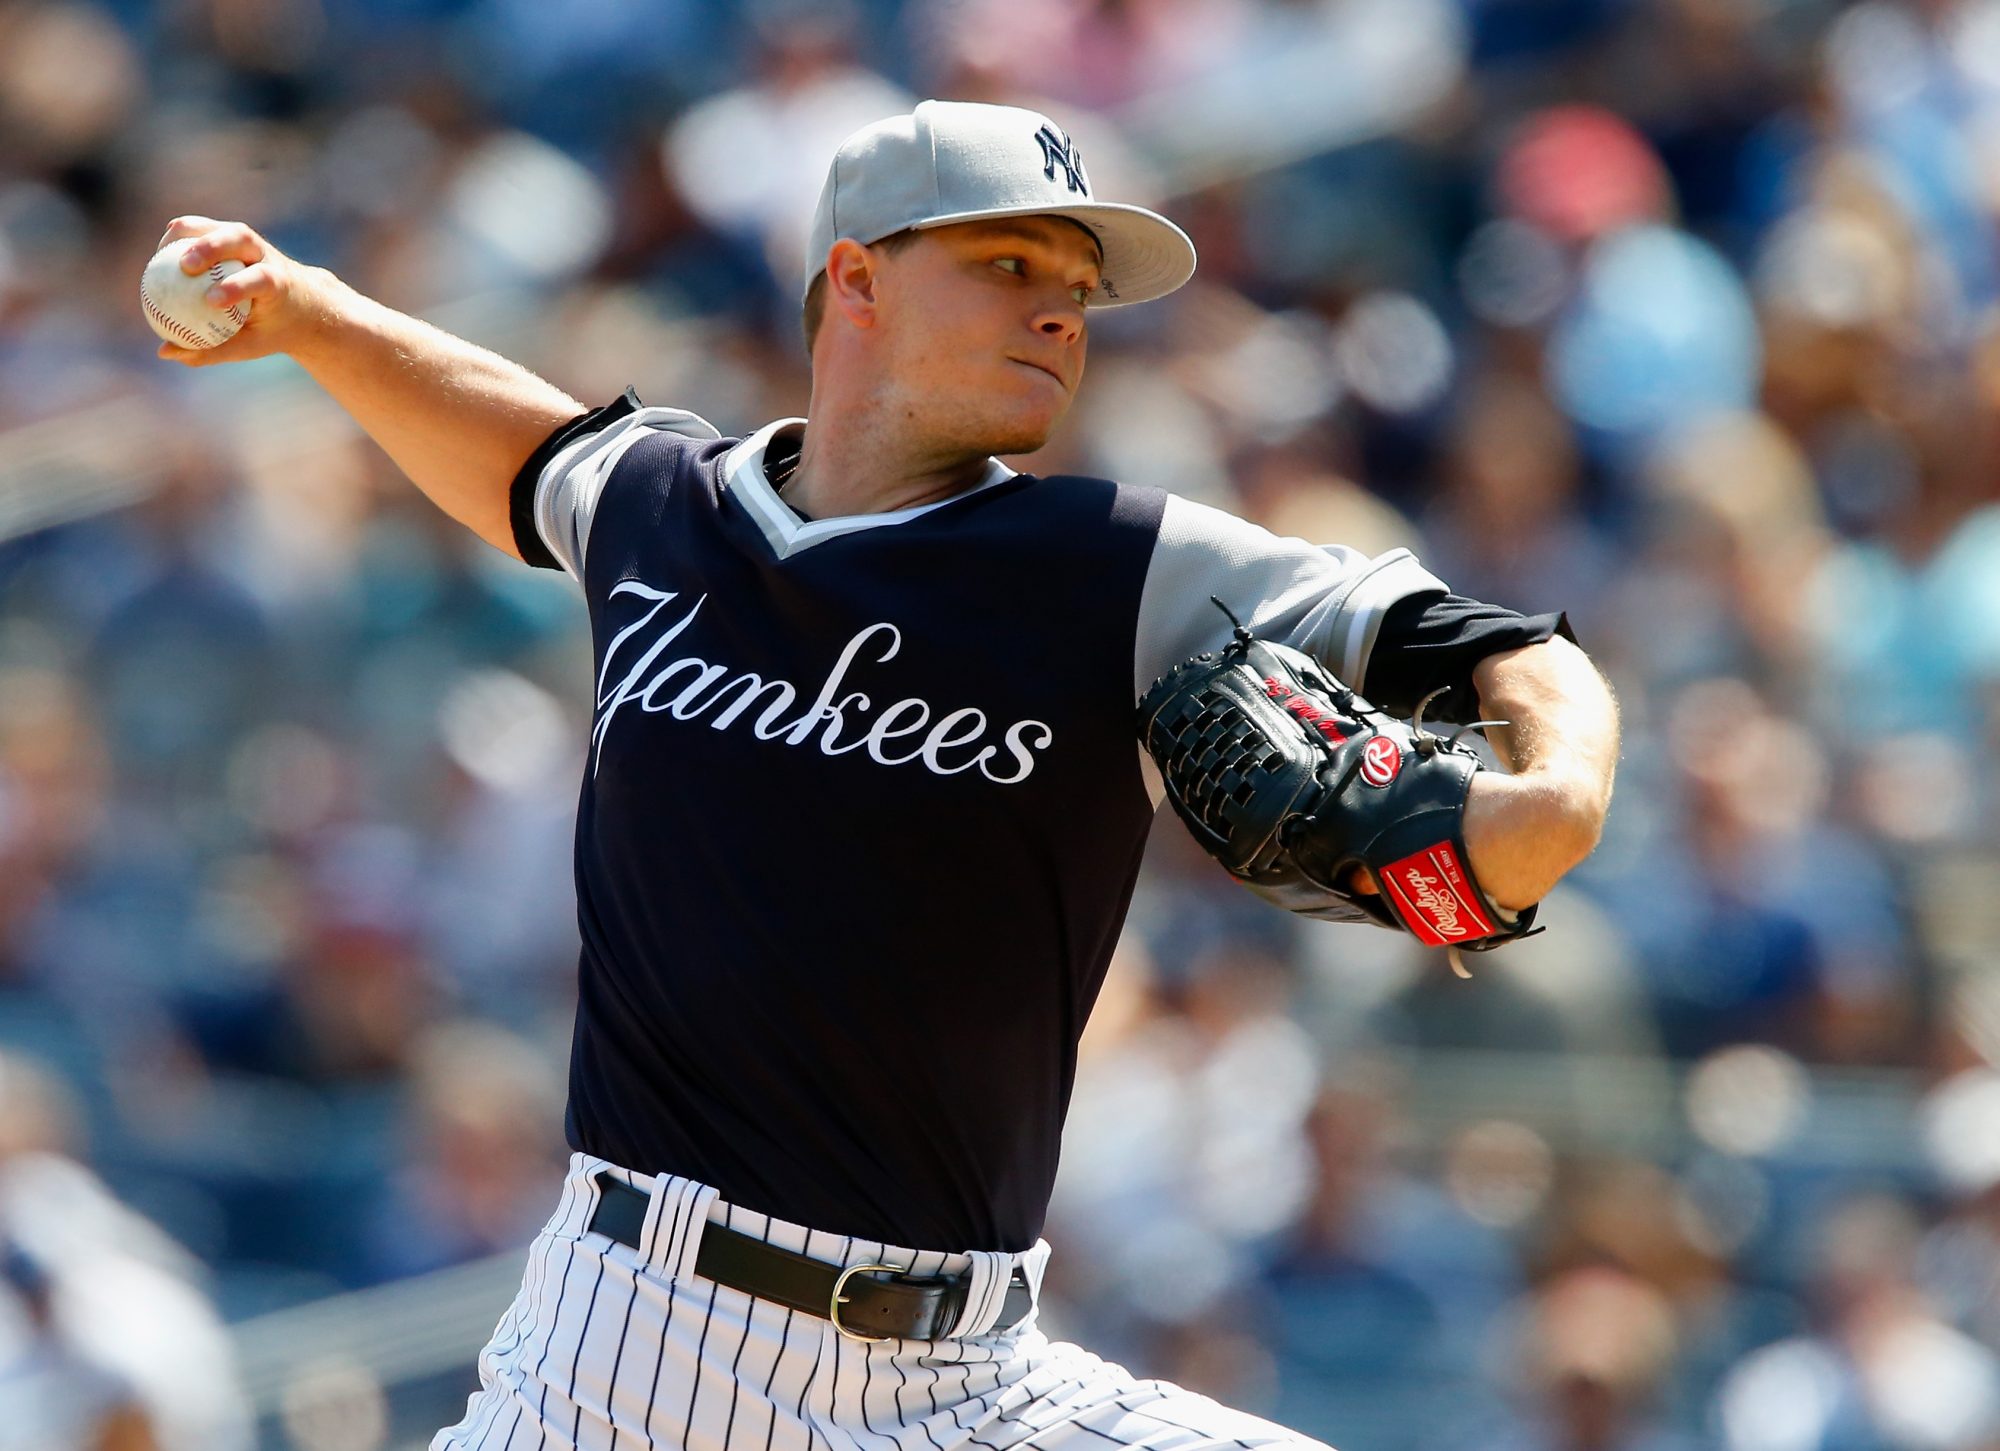 New York Yankees: Yesterday's Victory About More Than Baseball For Sonny Gray 